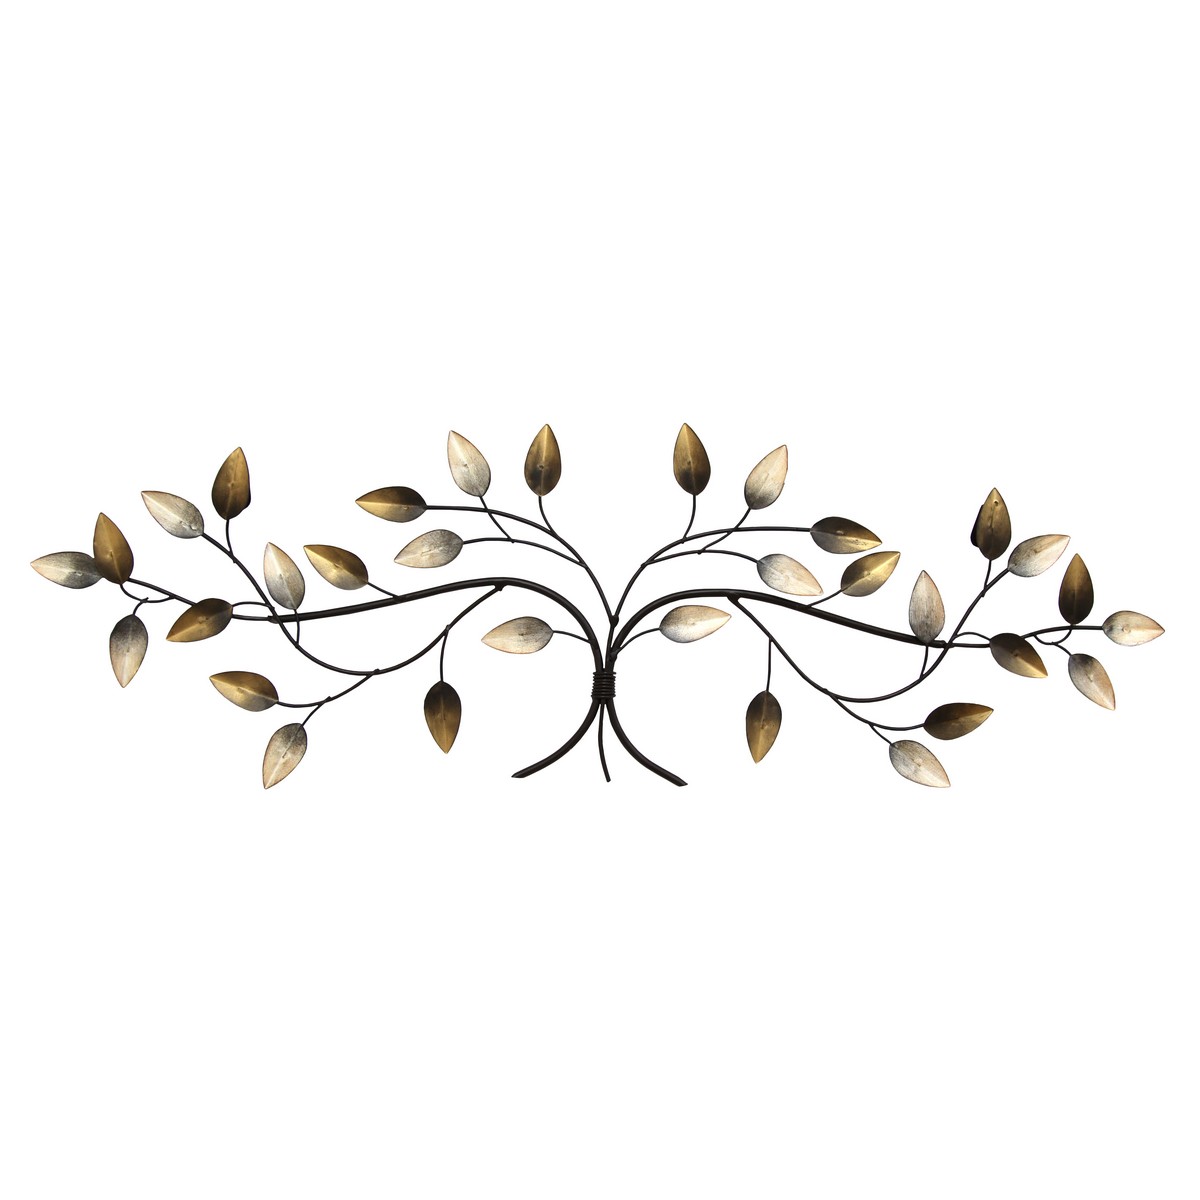 Stratton Home Decor Over the Door Blowing Leaves Wall Decor - Multi